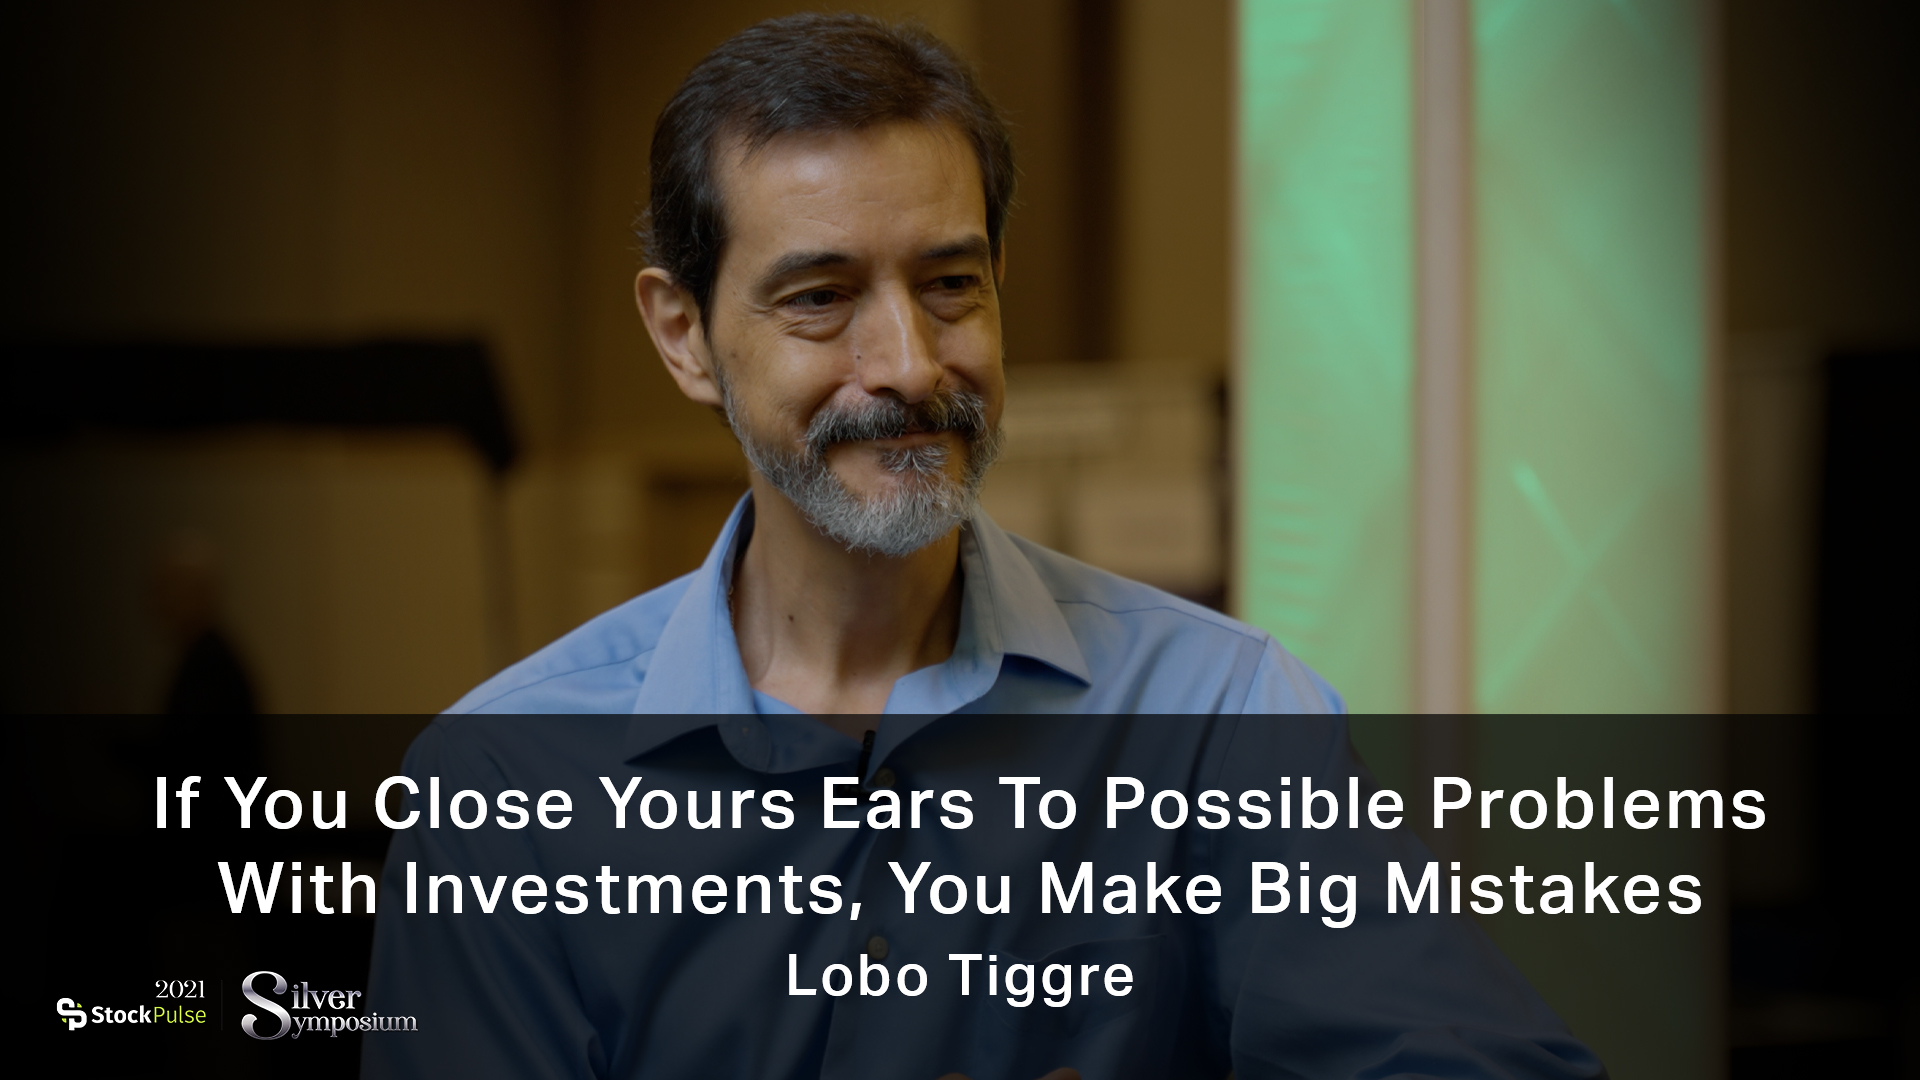 Lobo Tiggre: If You Close Yours Ears To Possible Problems With Investments, You Make Big Mistakes